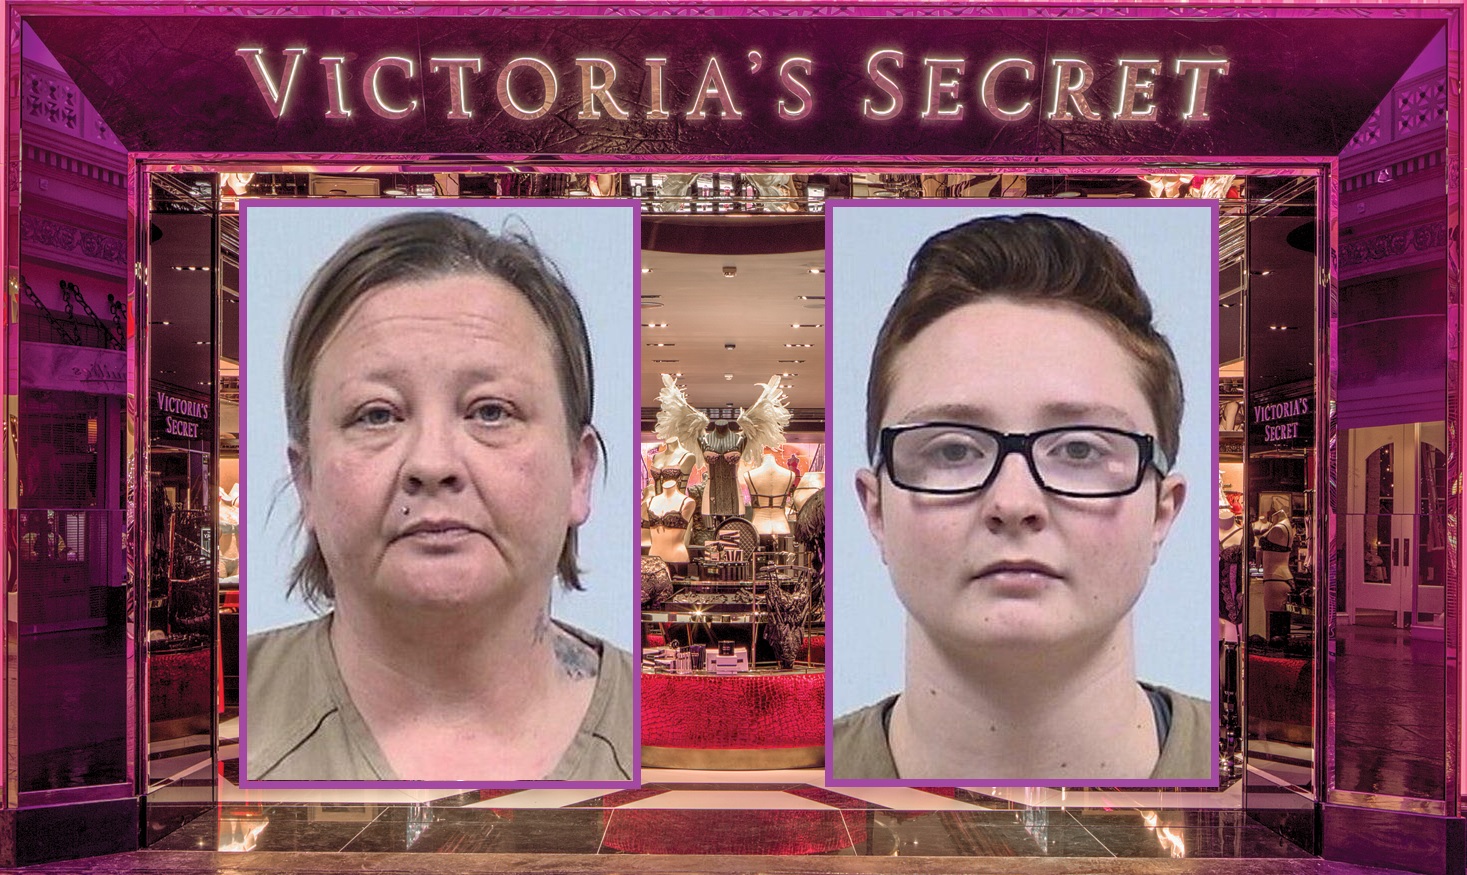 Coupon Scammer Ordered to Repay $100,000 to Victoria's Secret